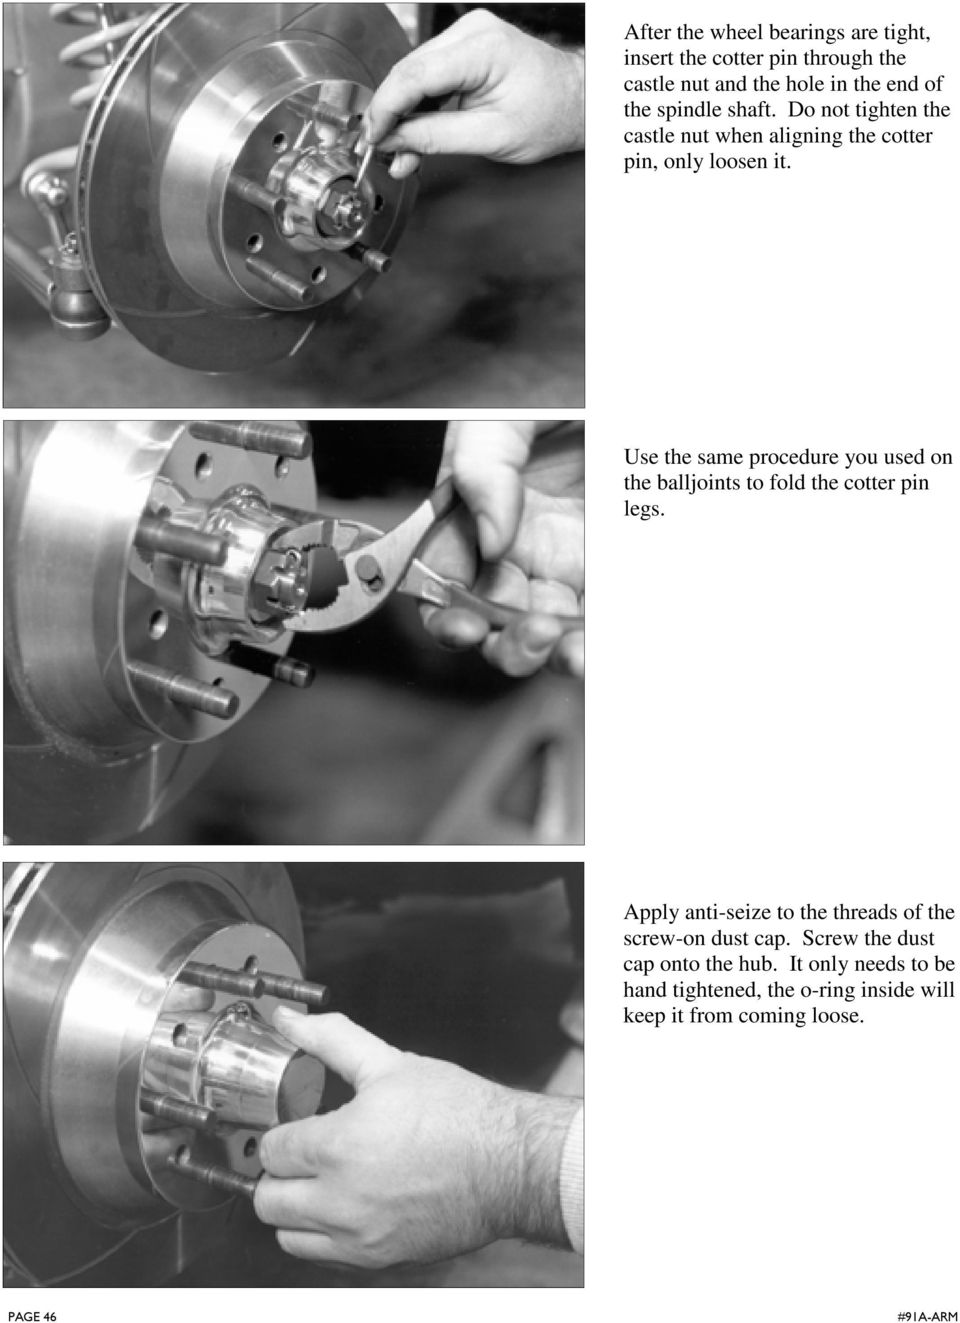 Use the same procedure you used on the balljoints to fold the cotter pin legs.